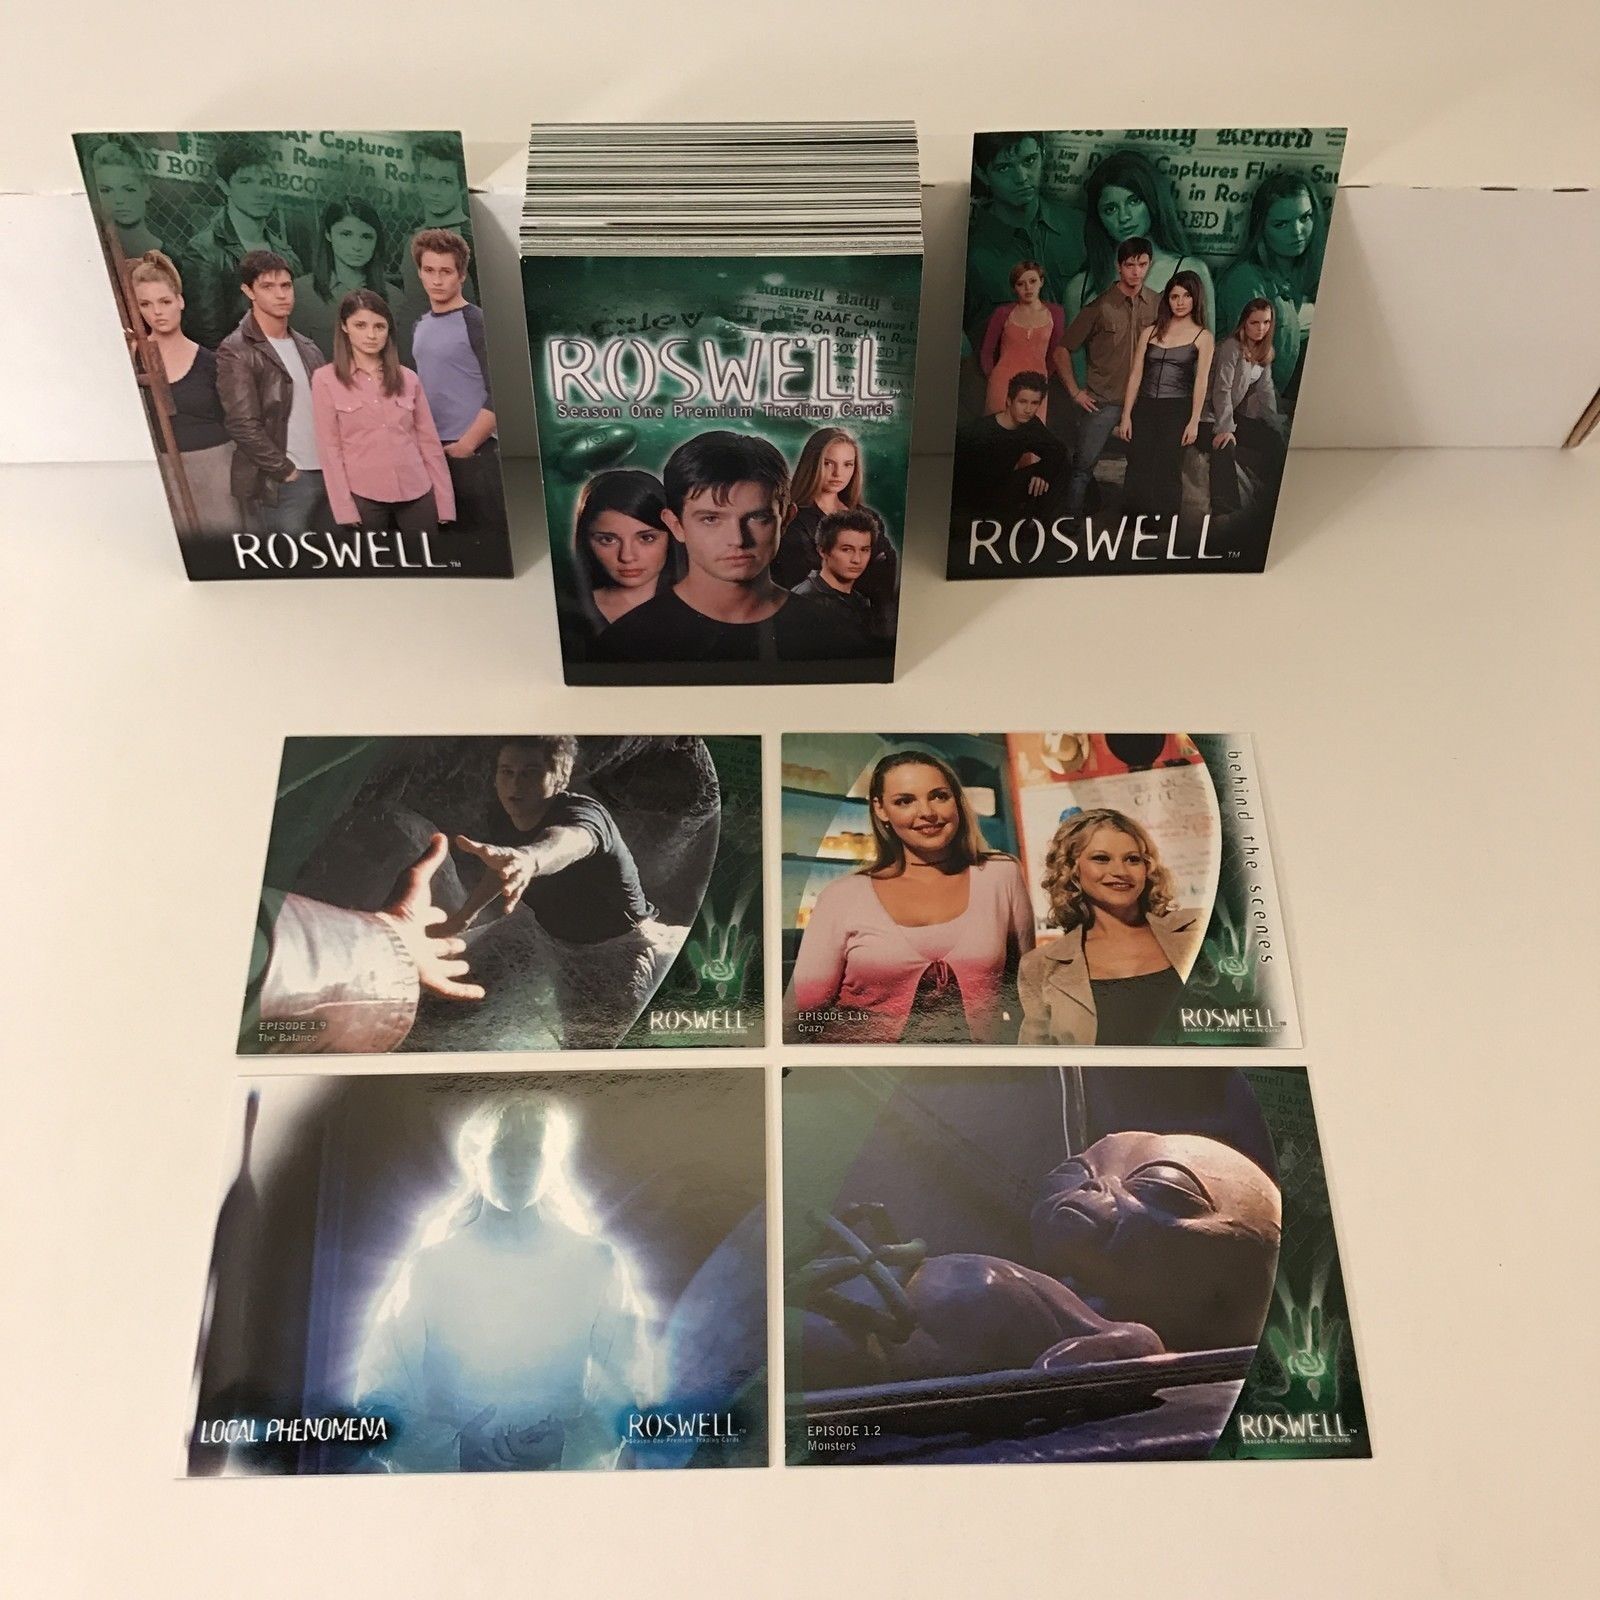 ROSWELL SEASON 1 (2000) COMPLETE CARD SET by JONATHAN FRAKES w/ 2 Promo Cards